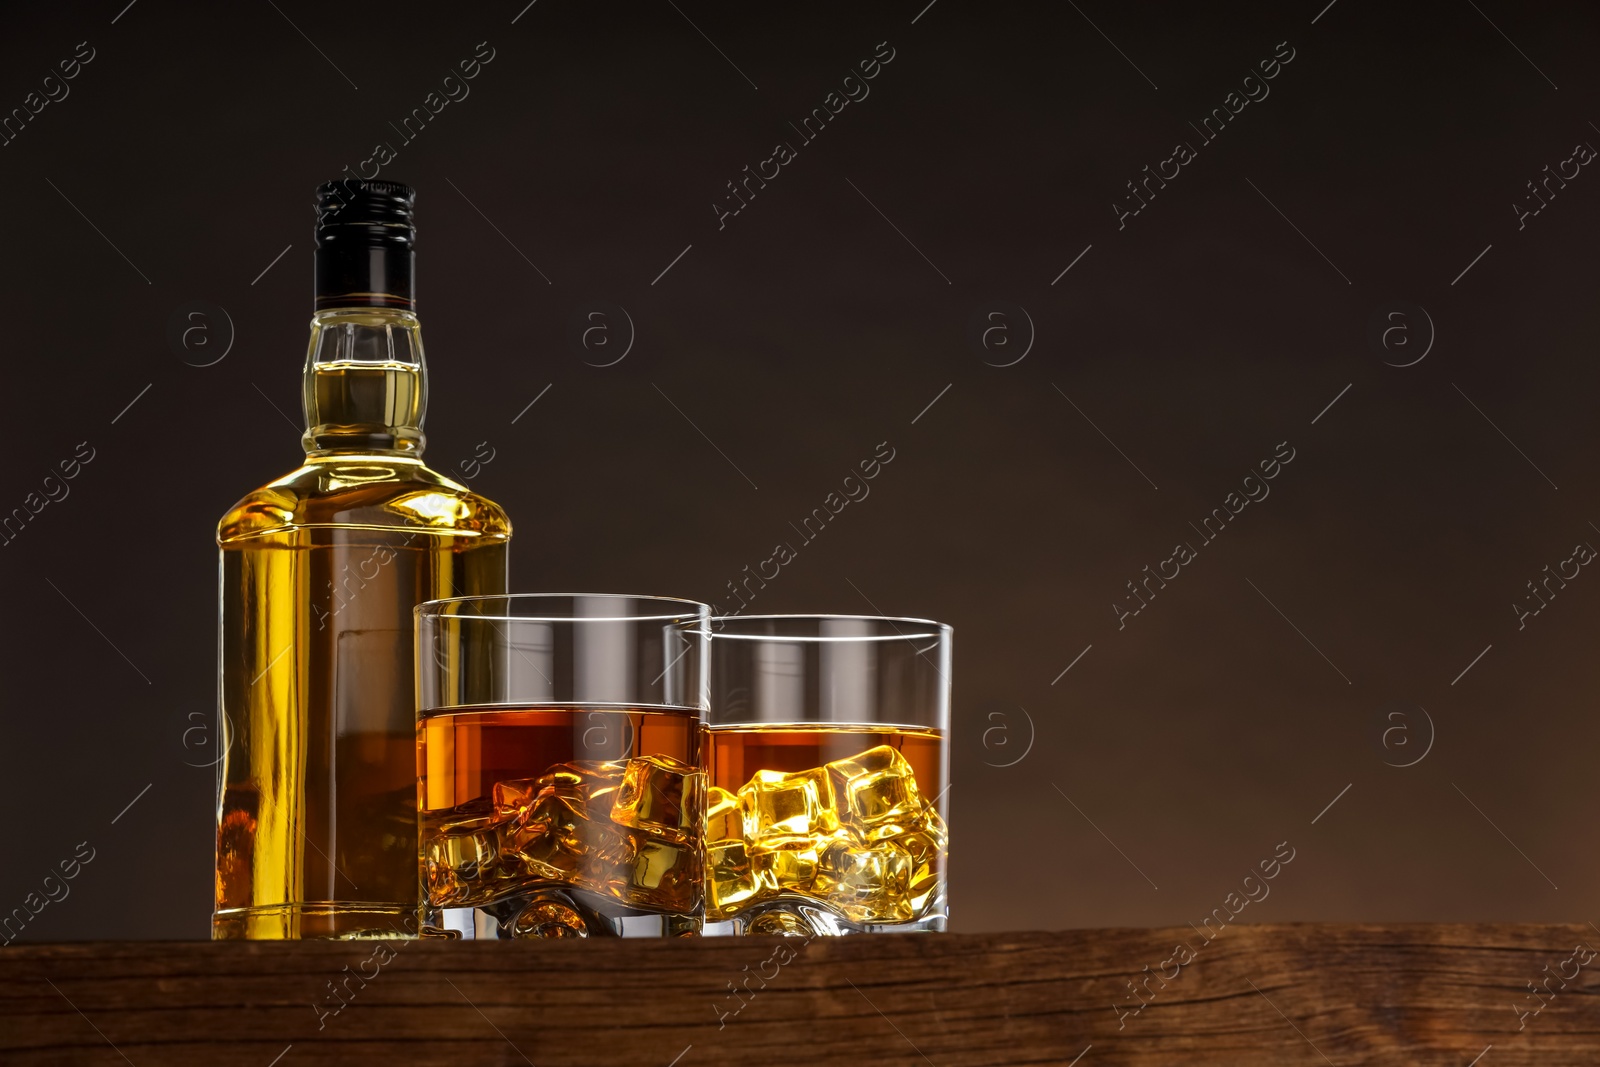 Photo of Whiskey with ice cubes in glasses and bottle on wooden table against brown background, space for text